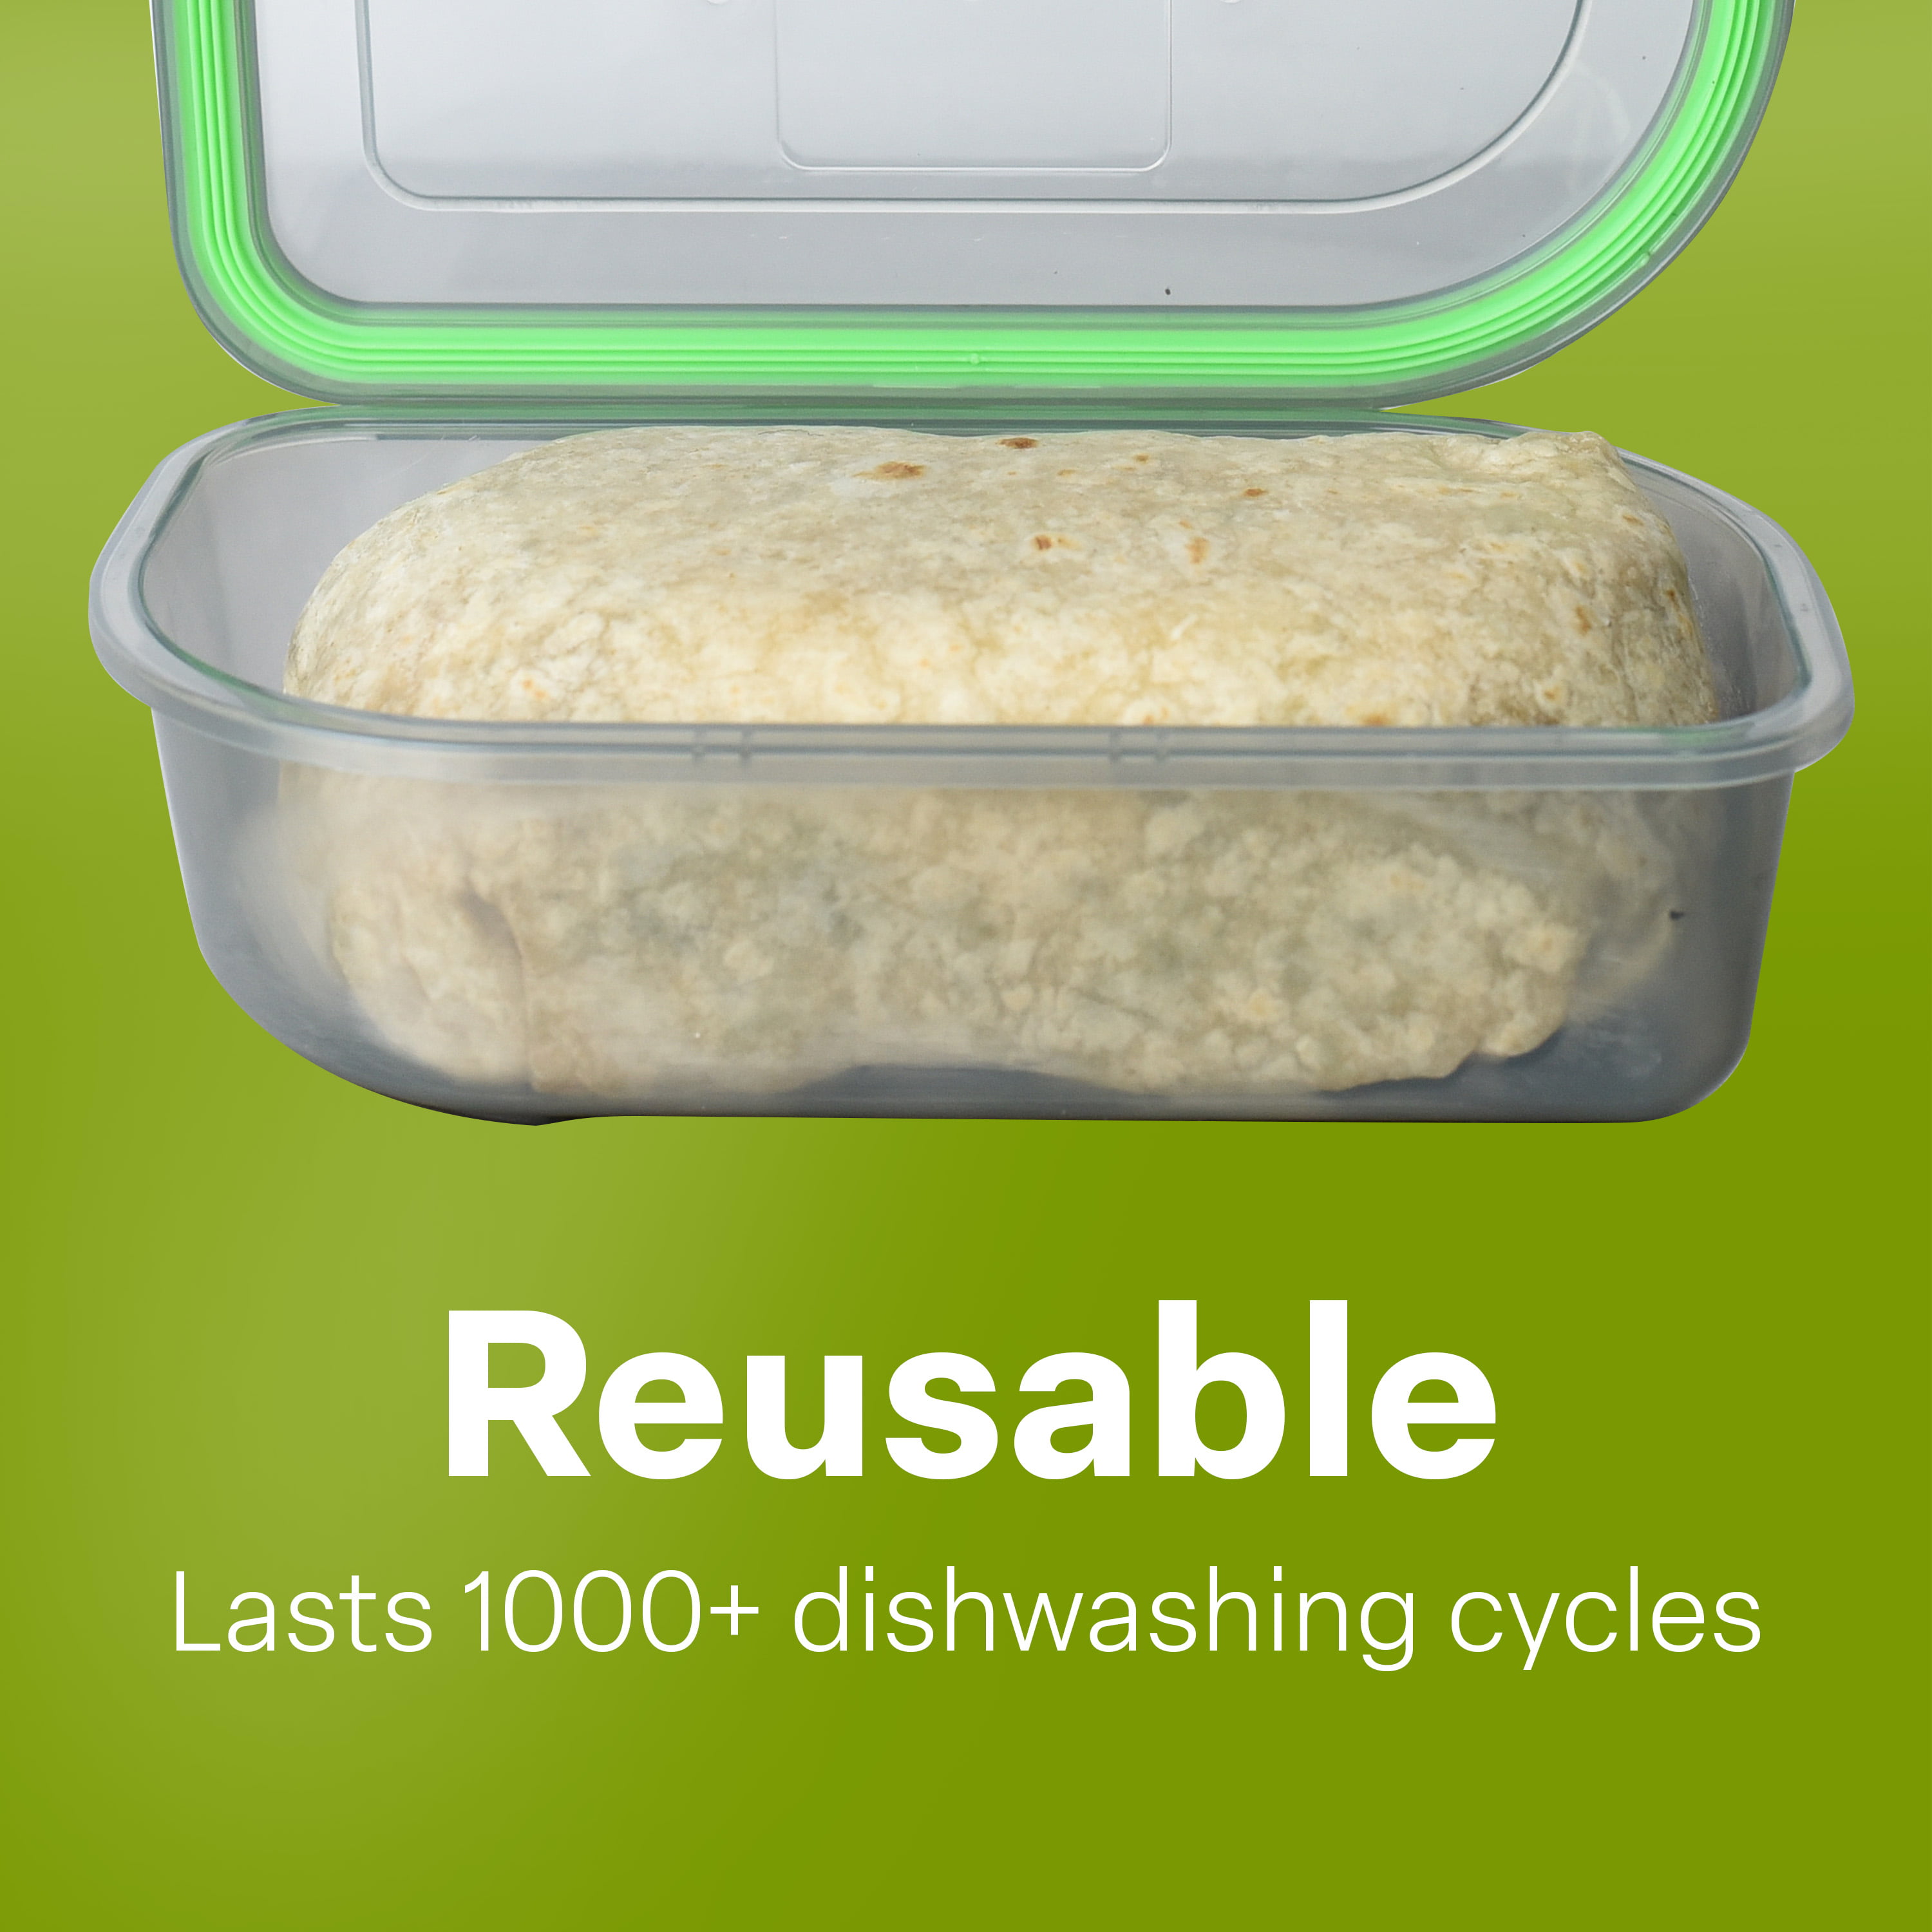 HowDoesShe - These reusable lunchable containers are